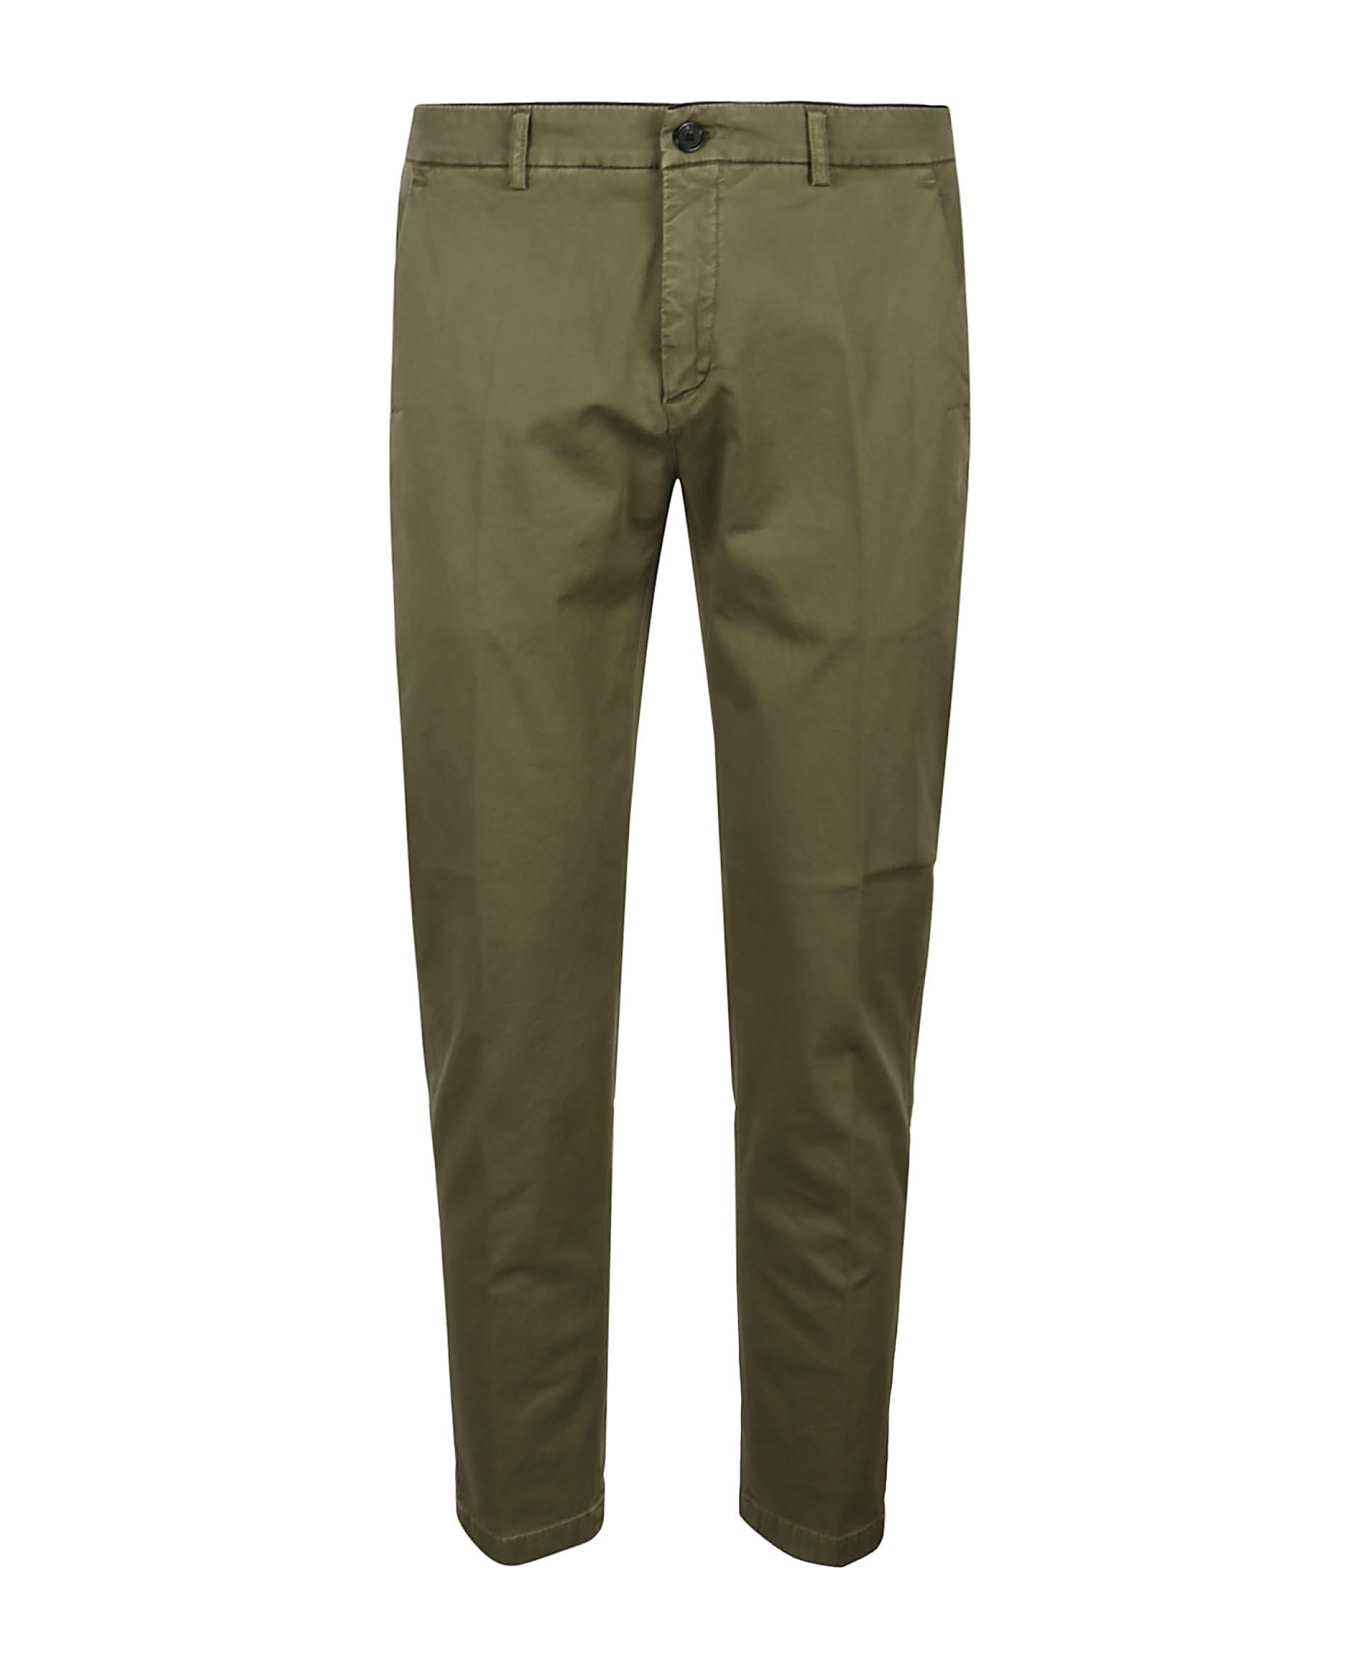 Department Five Cropped Prince Chinos Pant - Militare